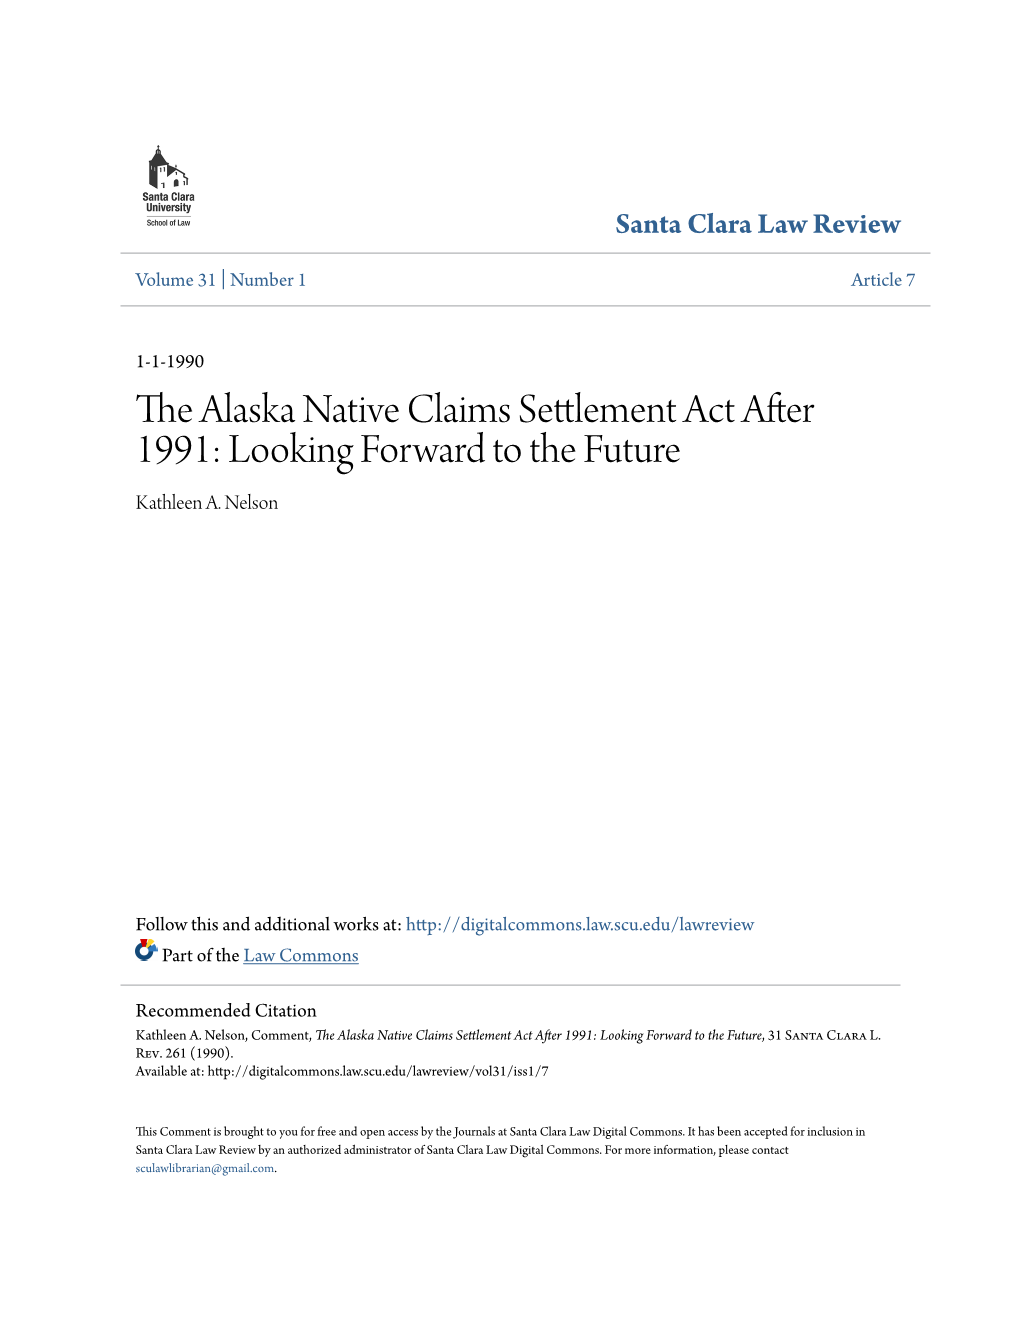 The Alaska Native Claims Settlement Act After 1991: Looking Forward to the Future Kathleen A